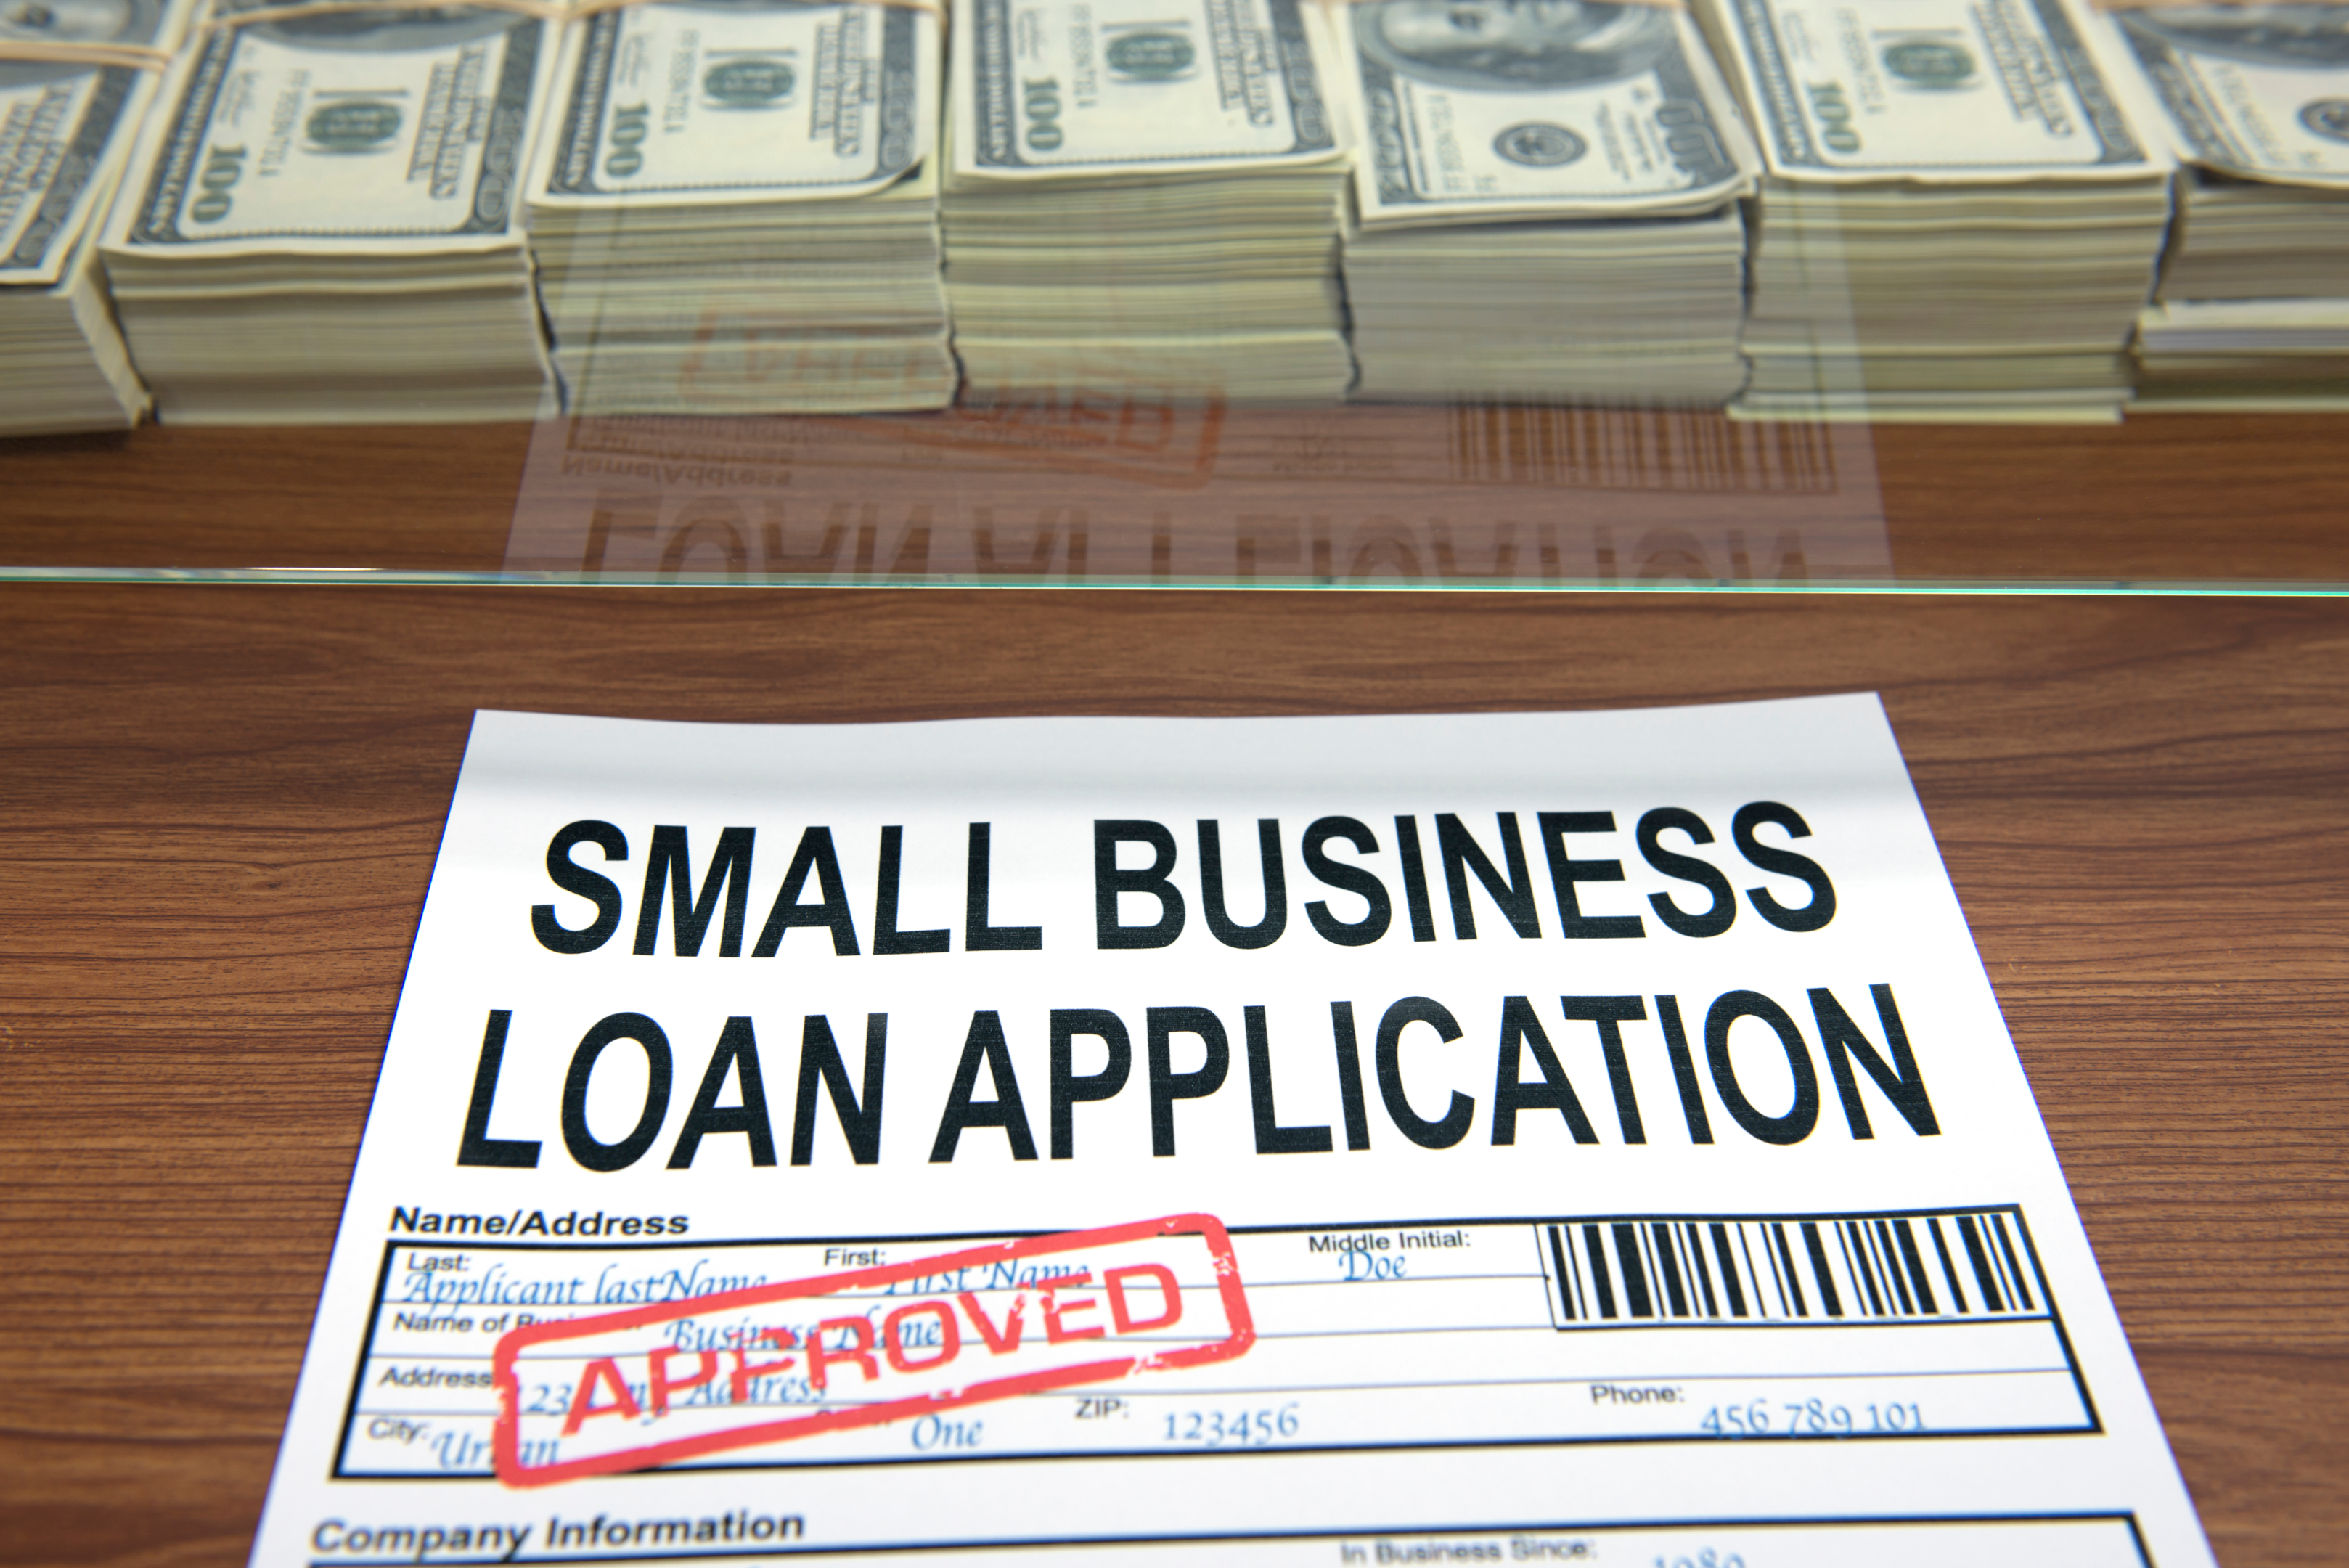 Small business startups loans can help with equipment financing, monthly payments, and other misc startup costs.